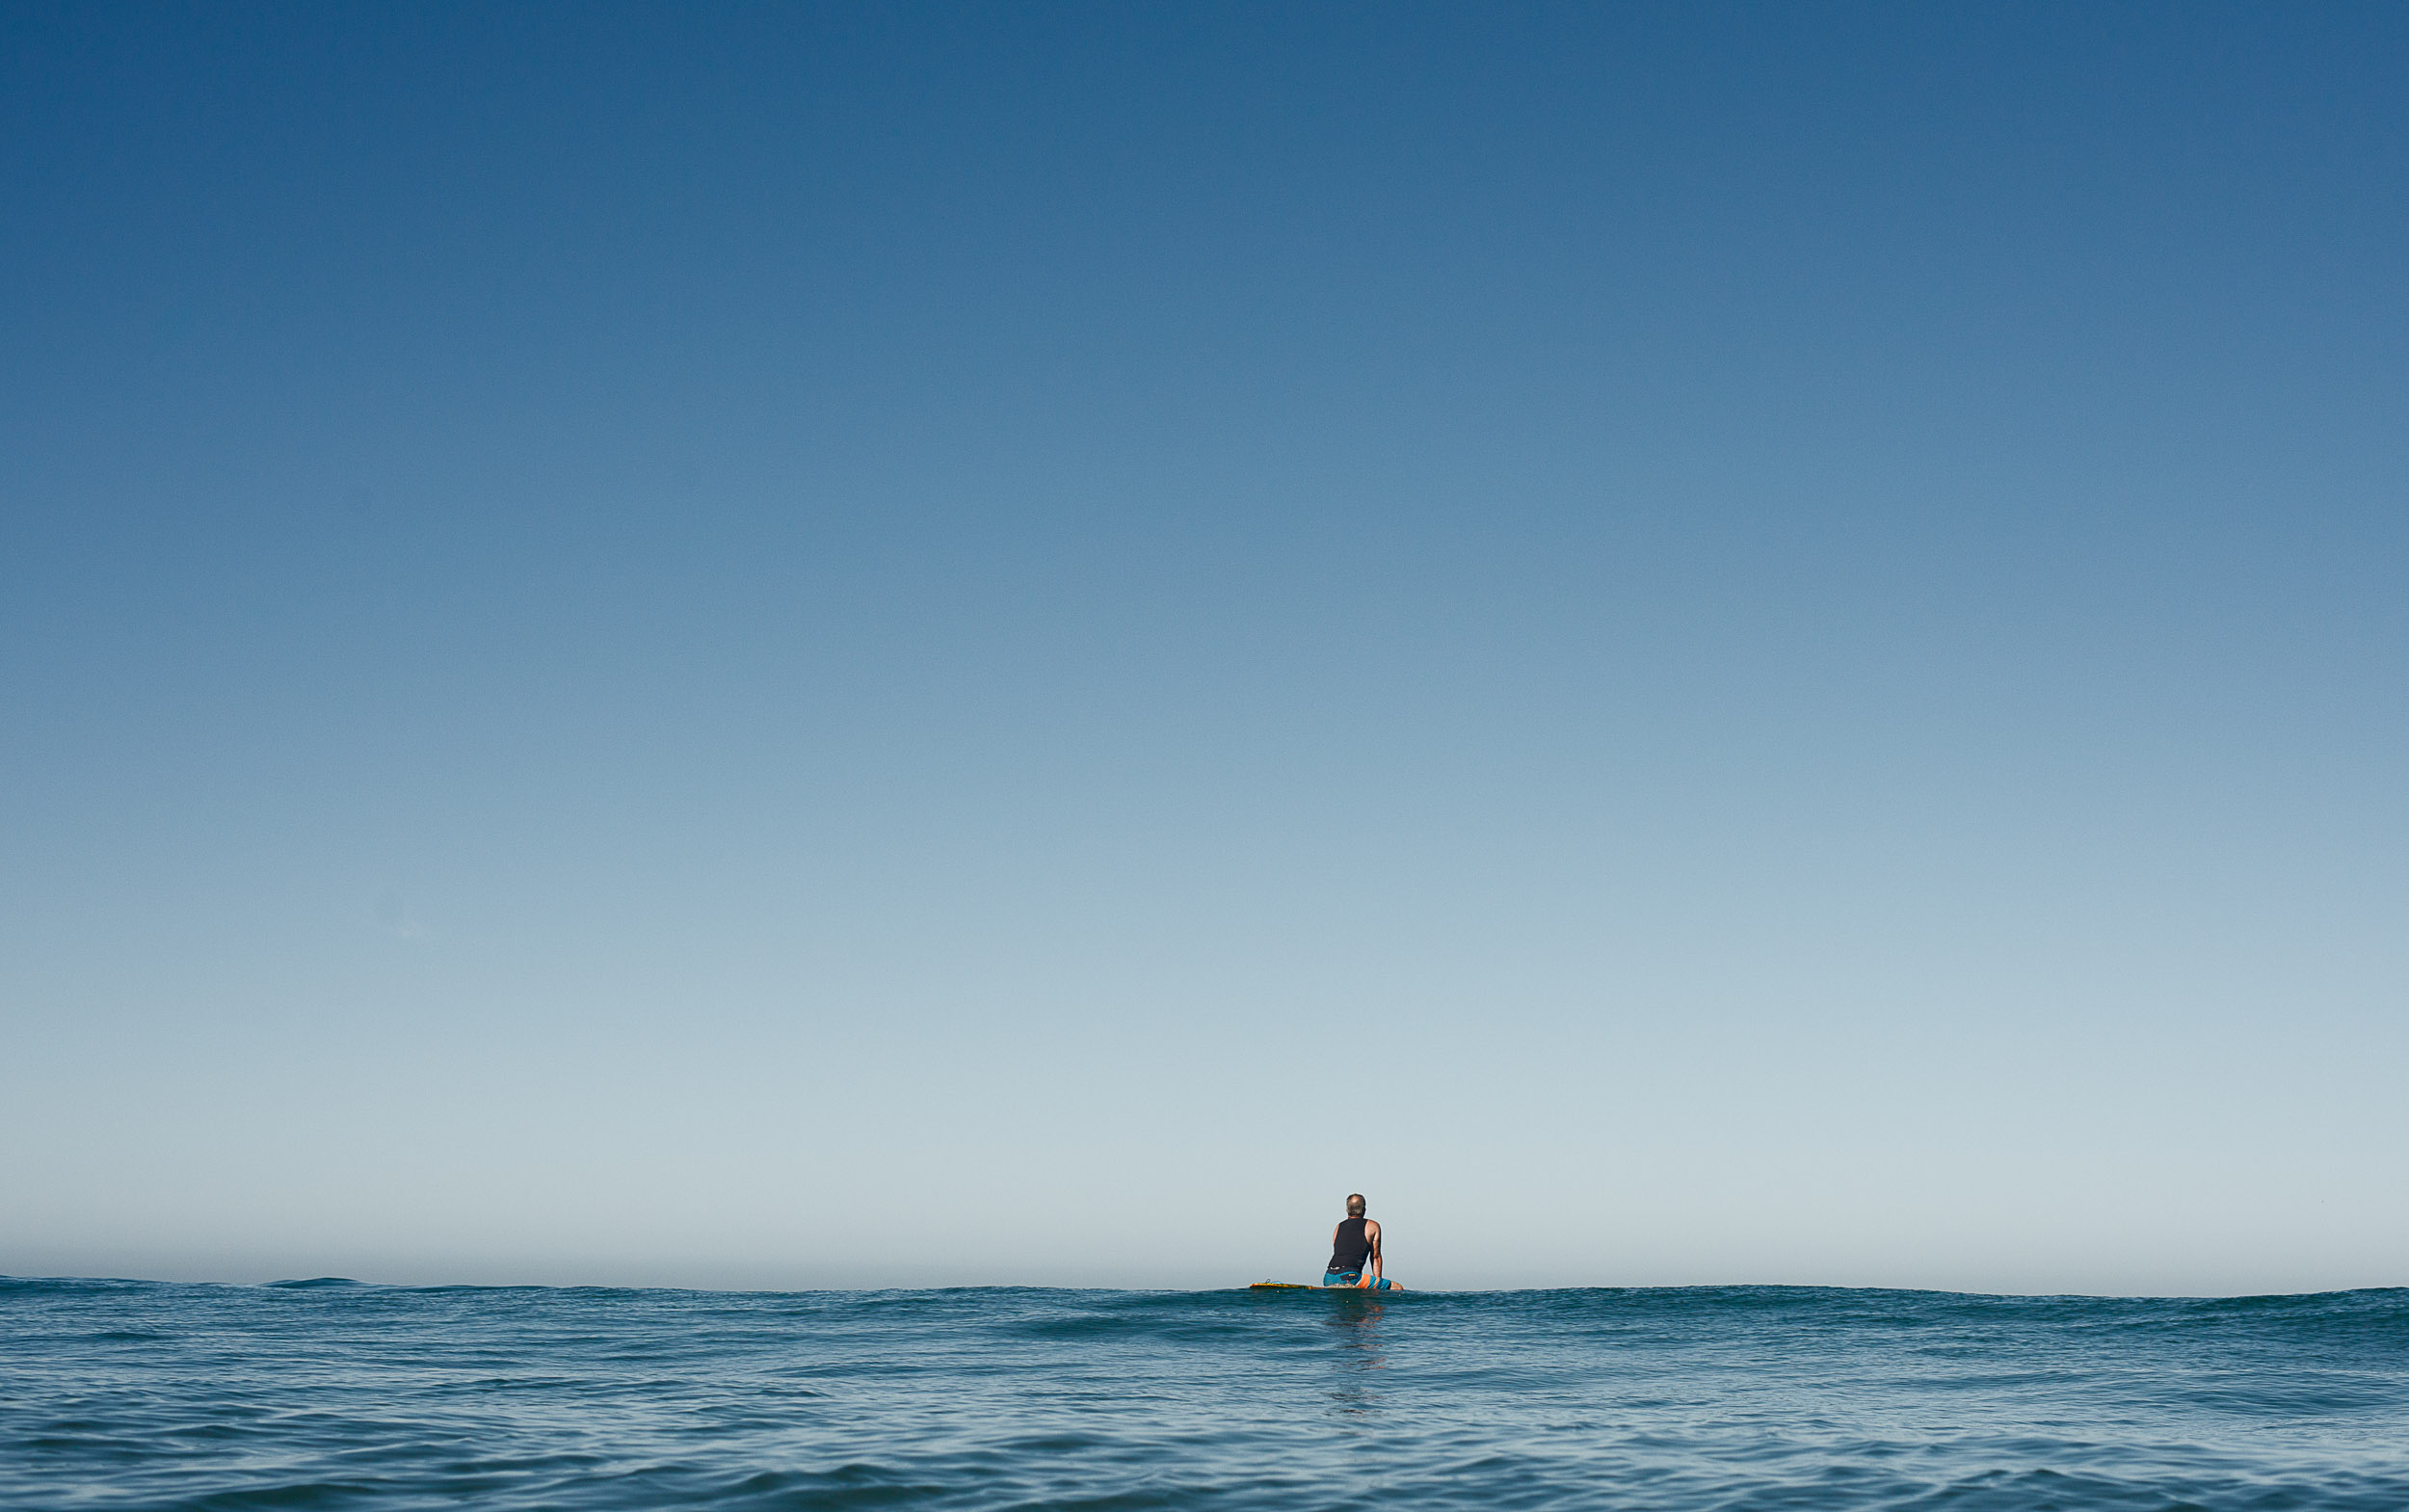 Older surfer John Moore waits for a wave in calm waters.